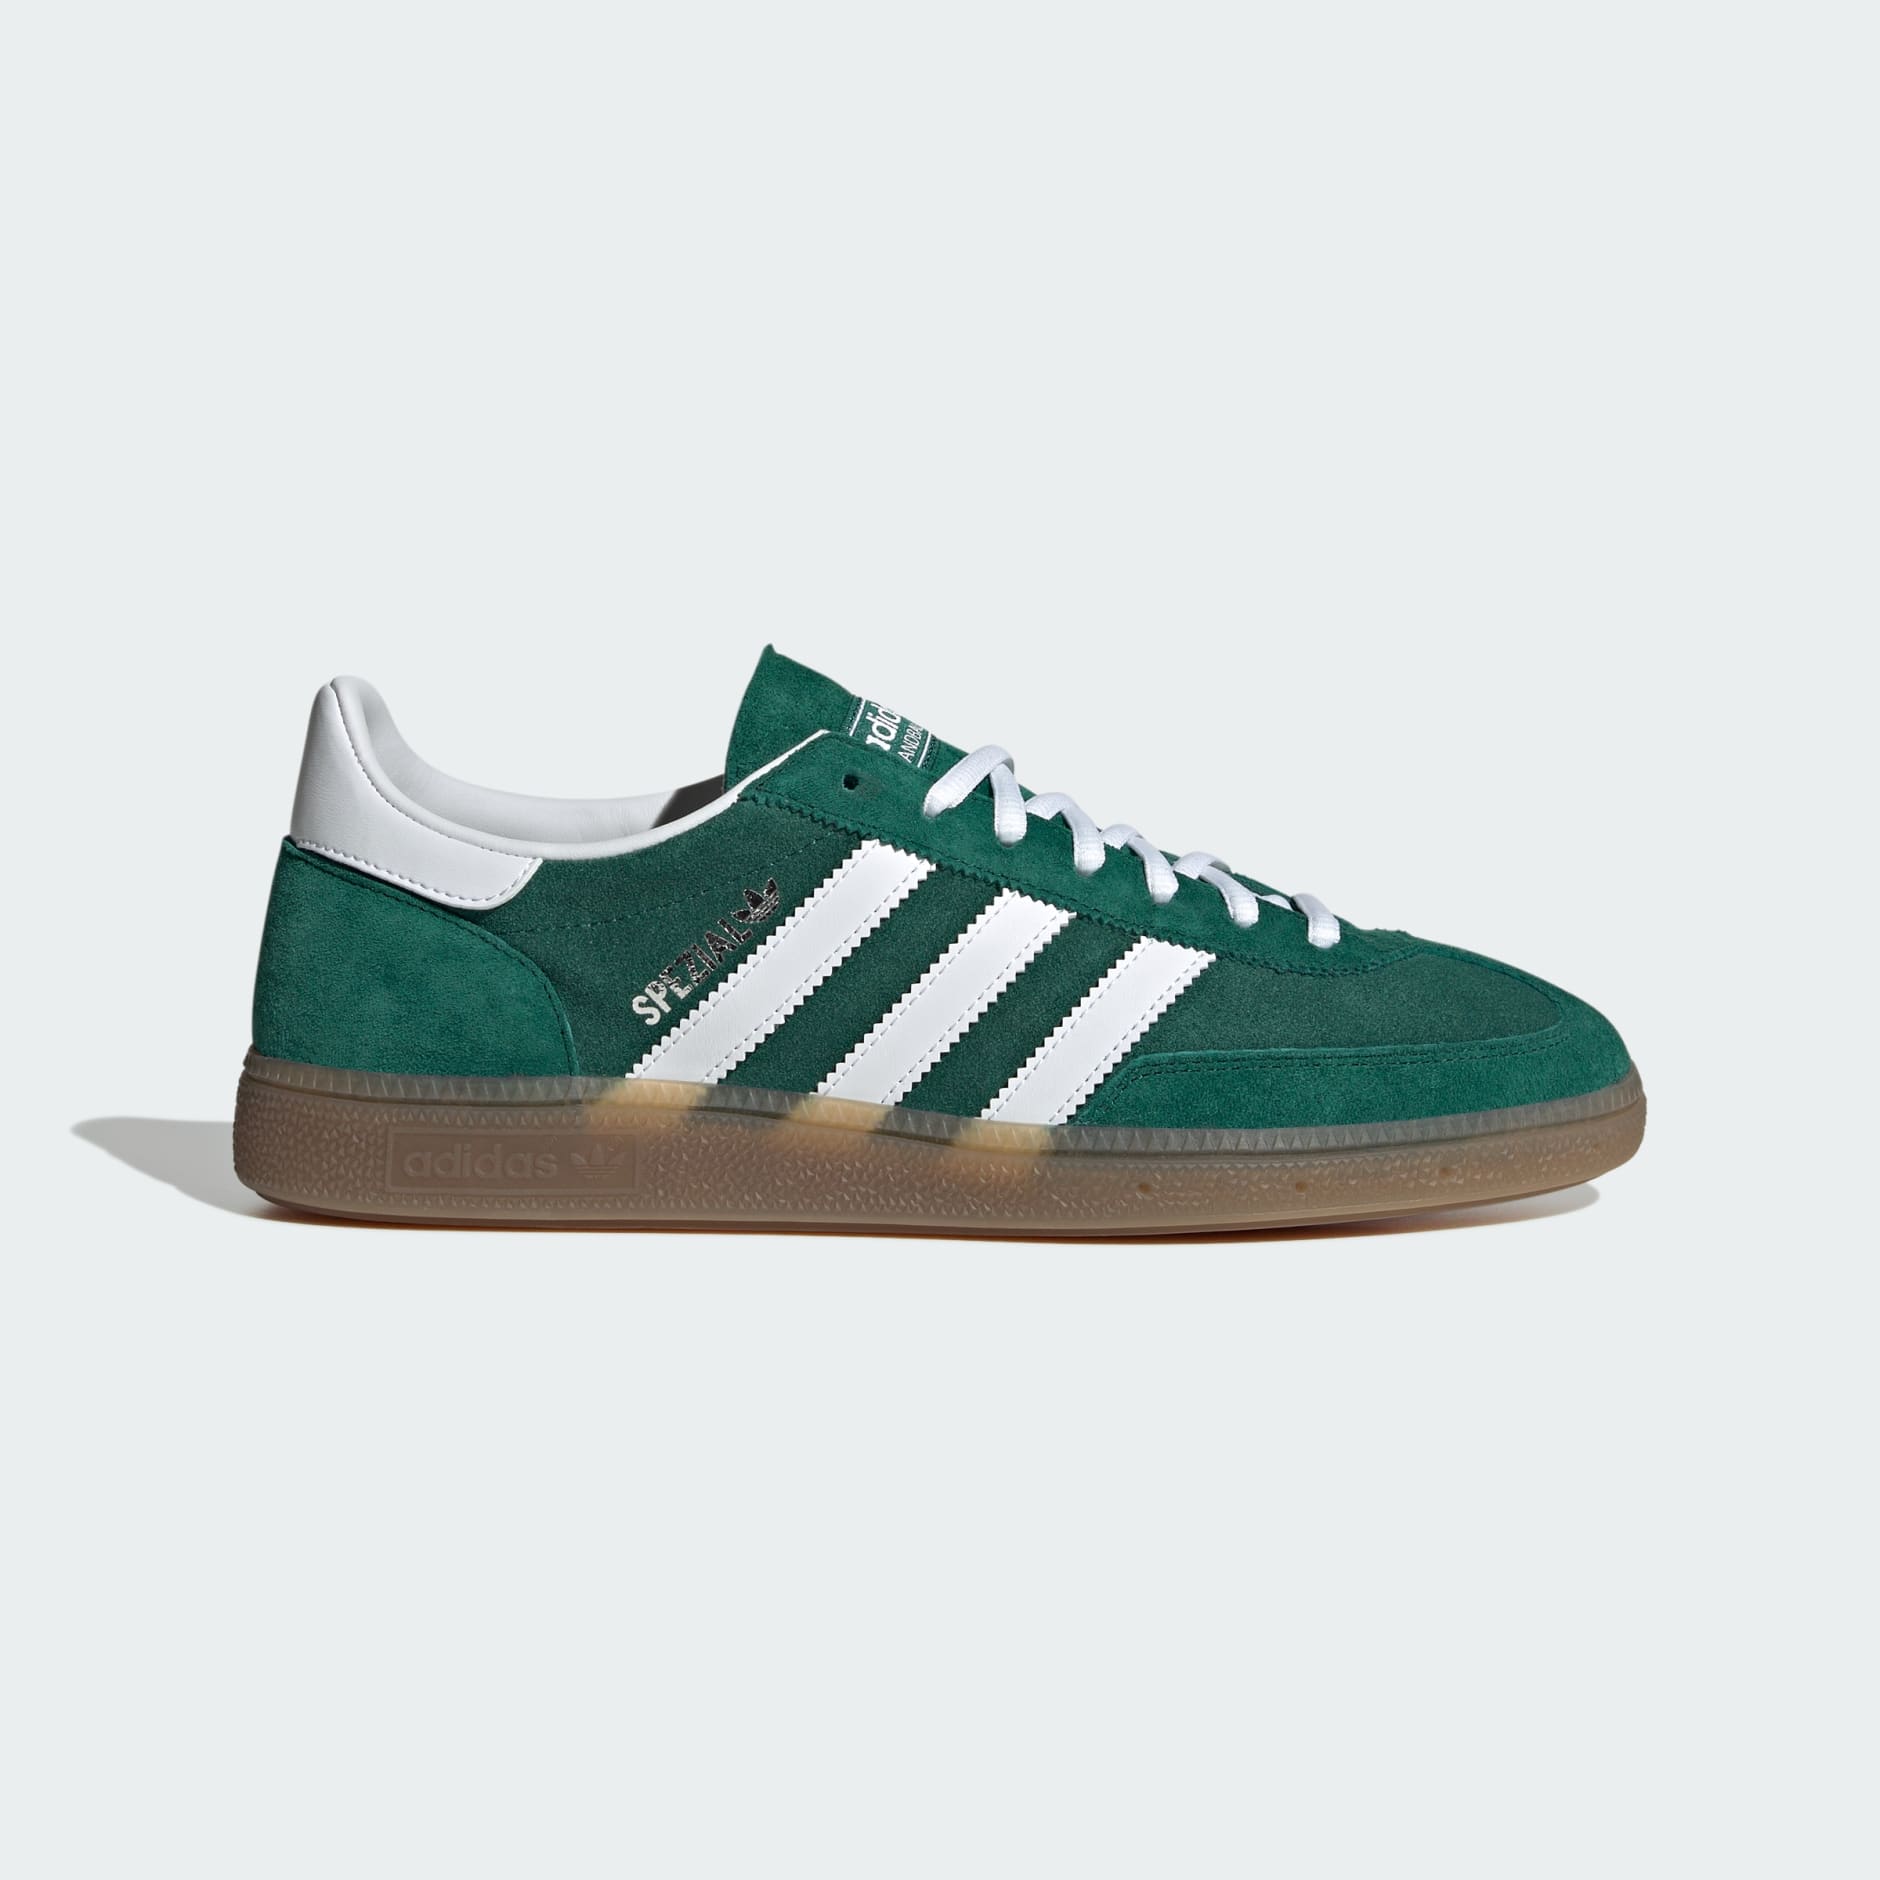 Everything You Need To Know About The adidas Handball SPEZIAL Trainer